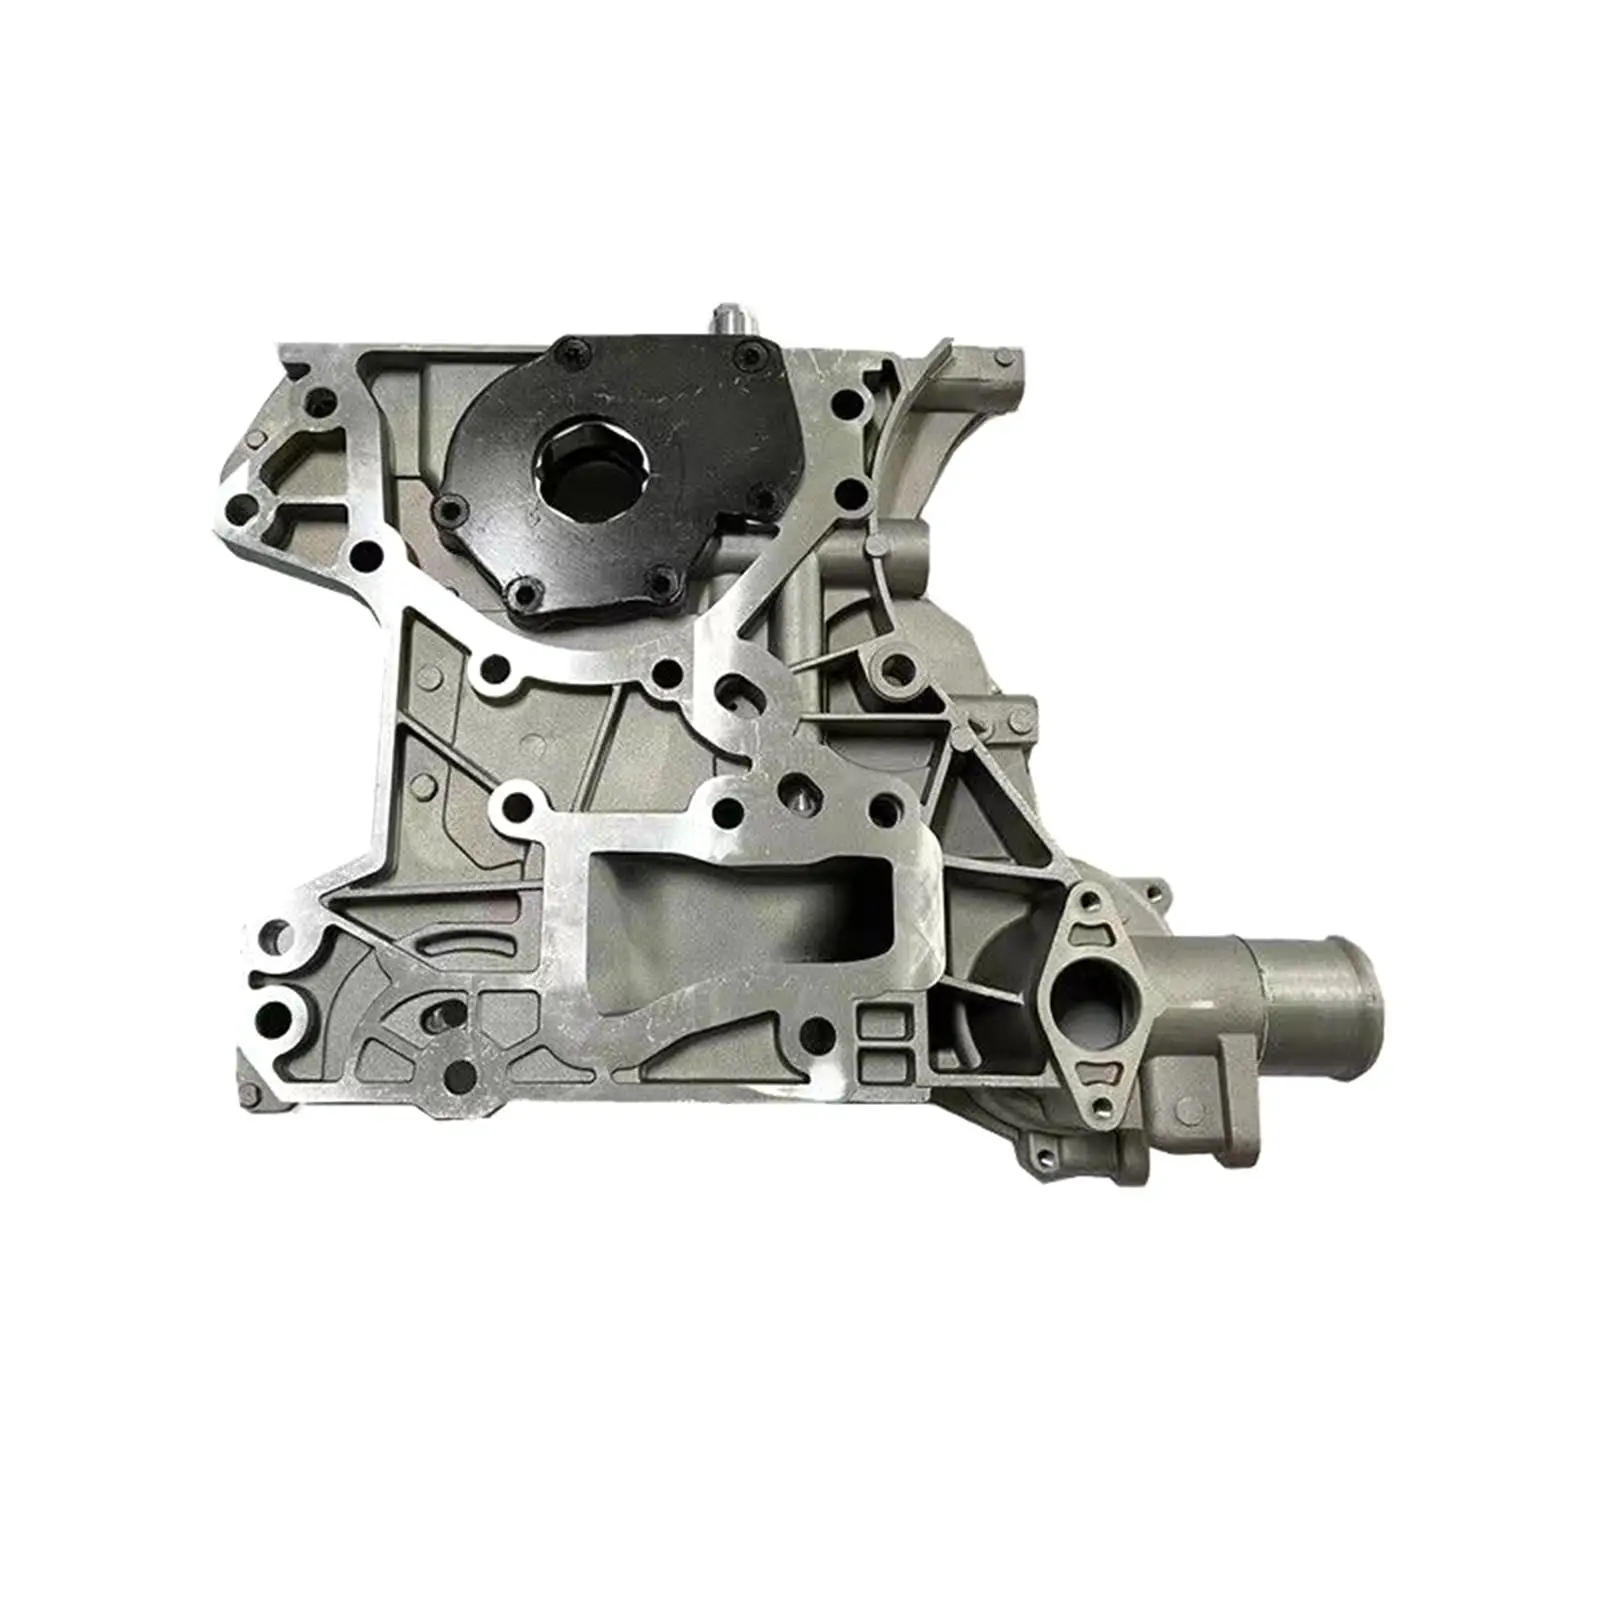 Oil Pump Timing Cover 25190897 55566793 Replacement for Insignia Zafira Convenient Installation Vehicle Repair Parts